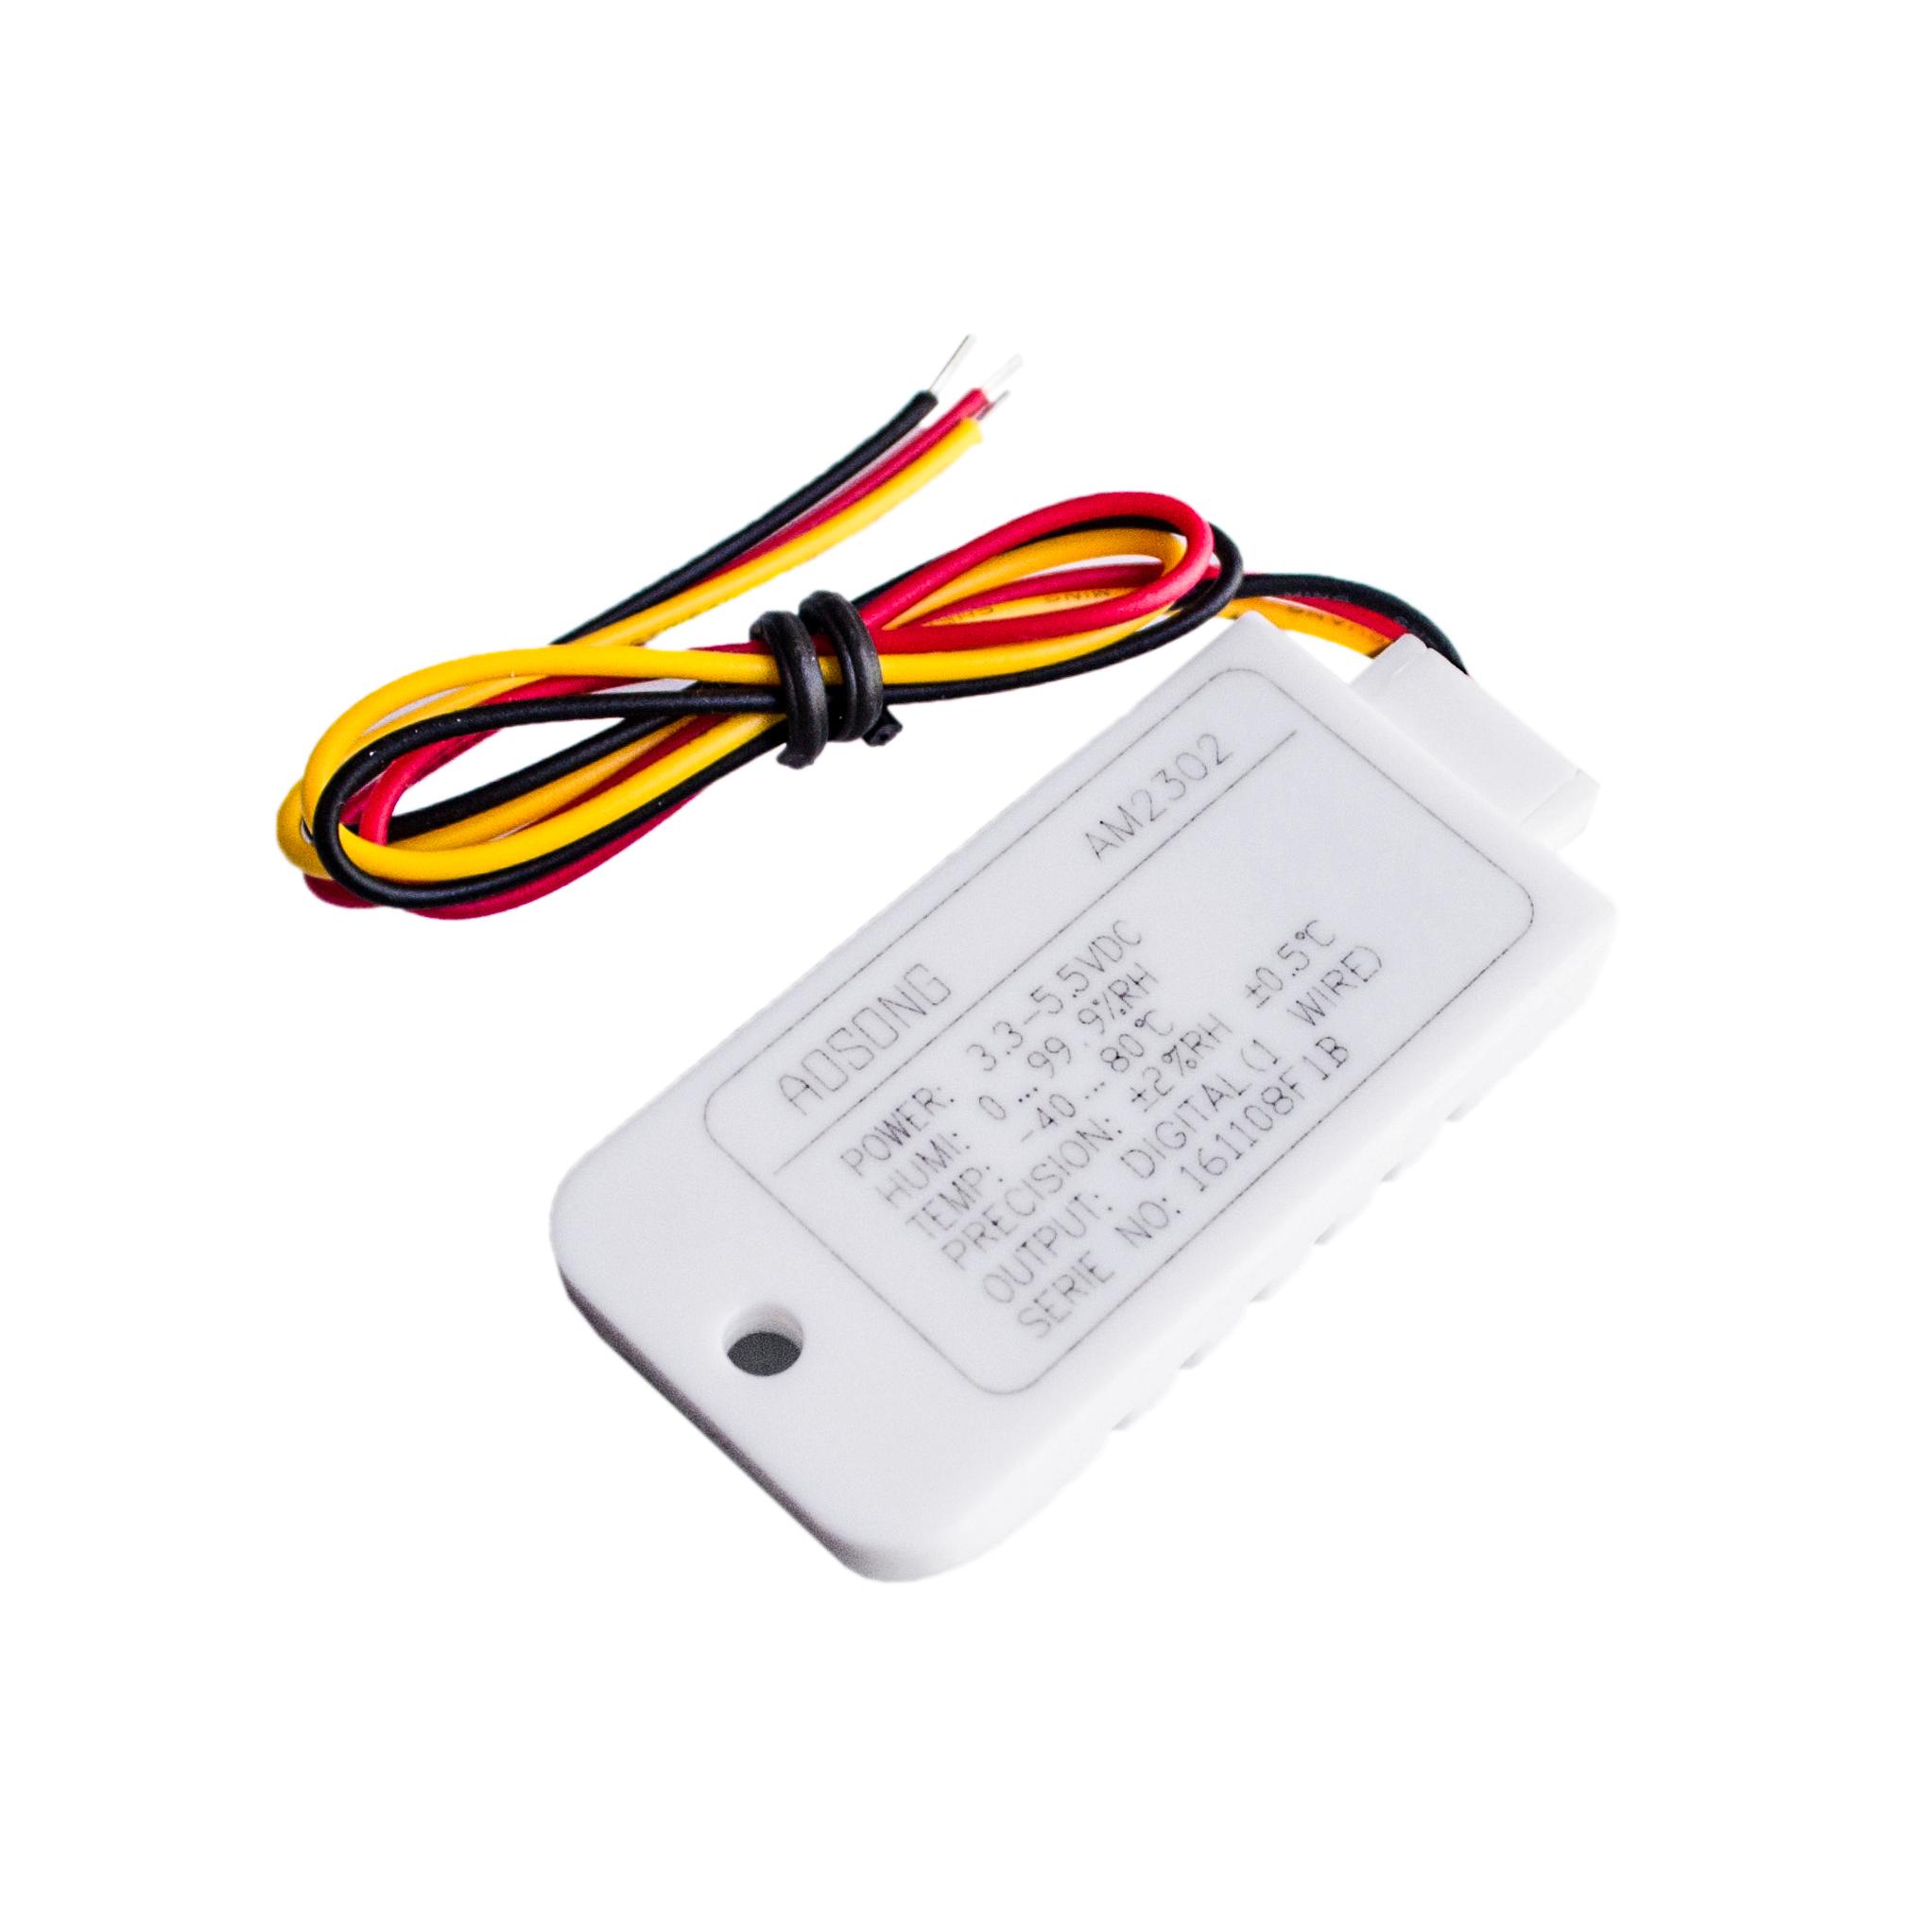 1PCSX-Wired-DHT22-AM2302-Digital-Temperature-and-Humidity-Sensor-AM2302